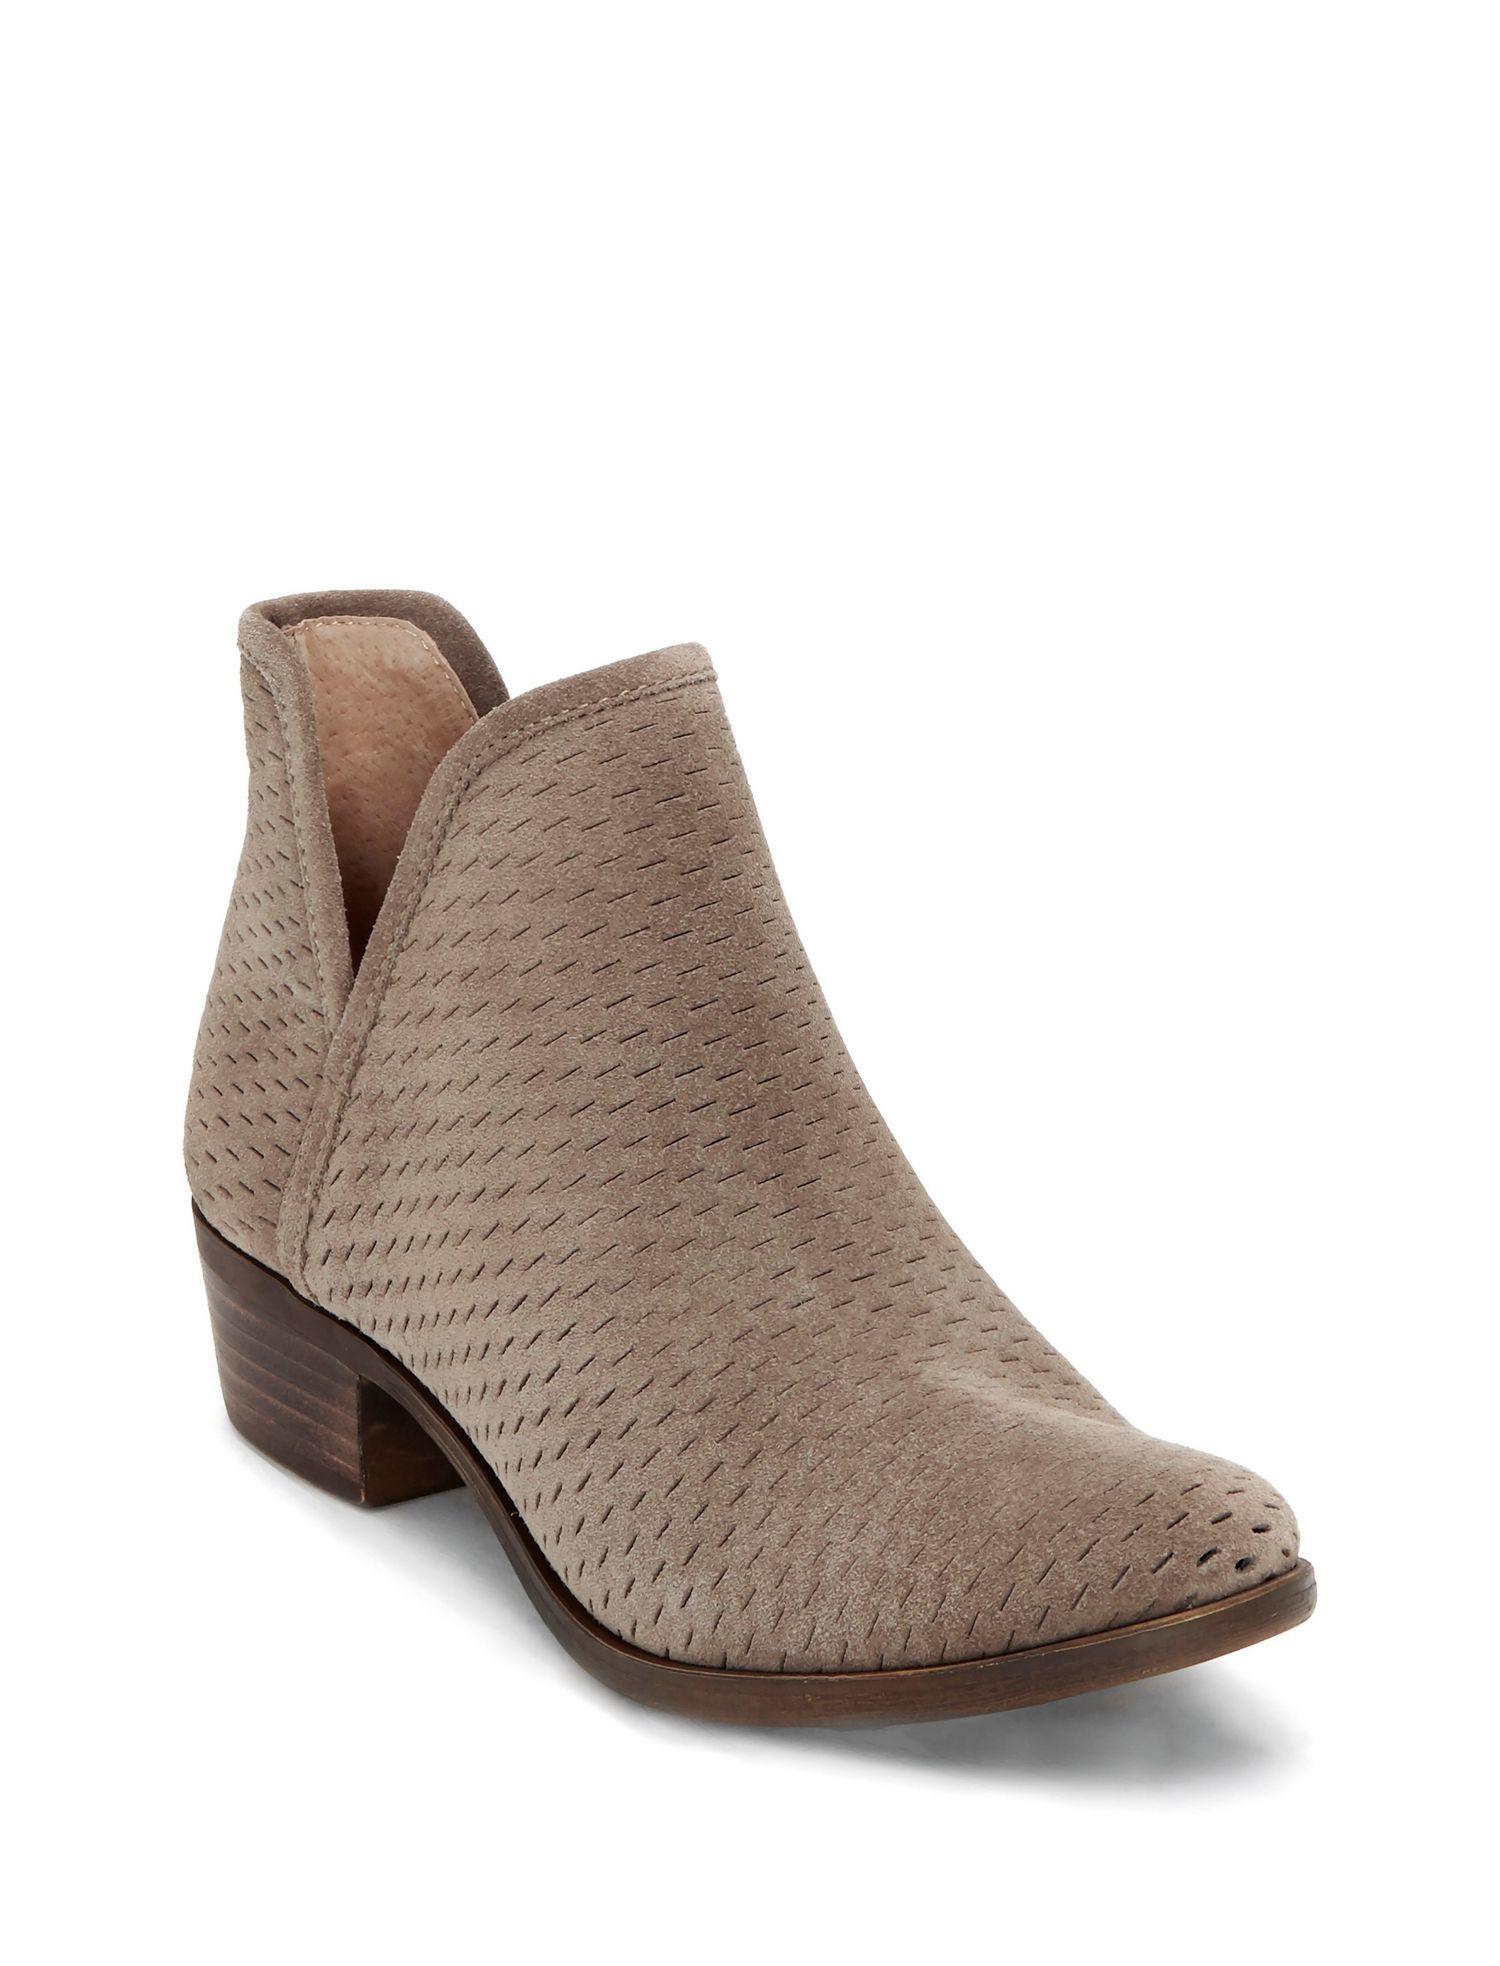 Lucky Brand Leather Baley Suede Bootie in Brown - Lyst